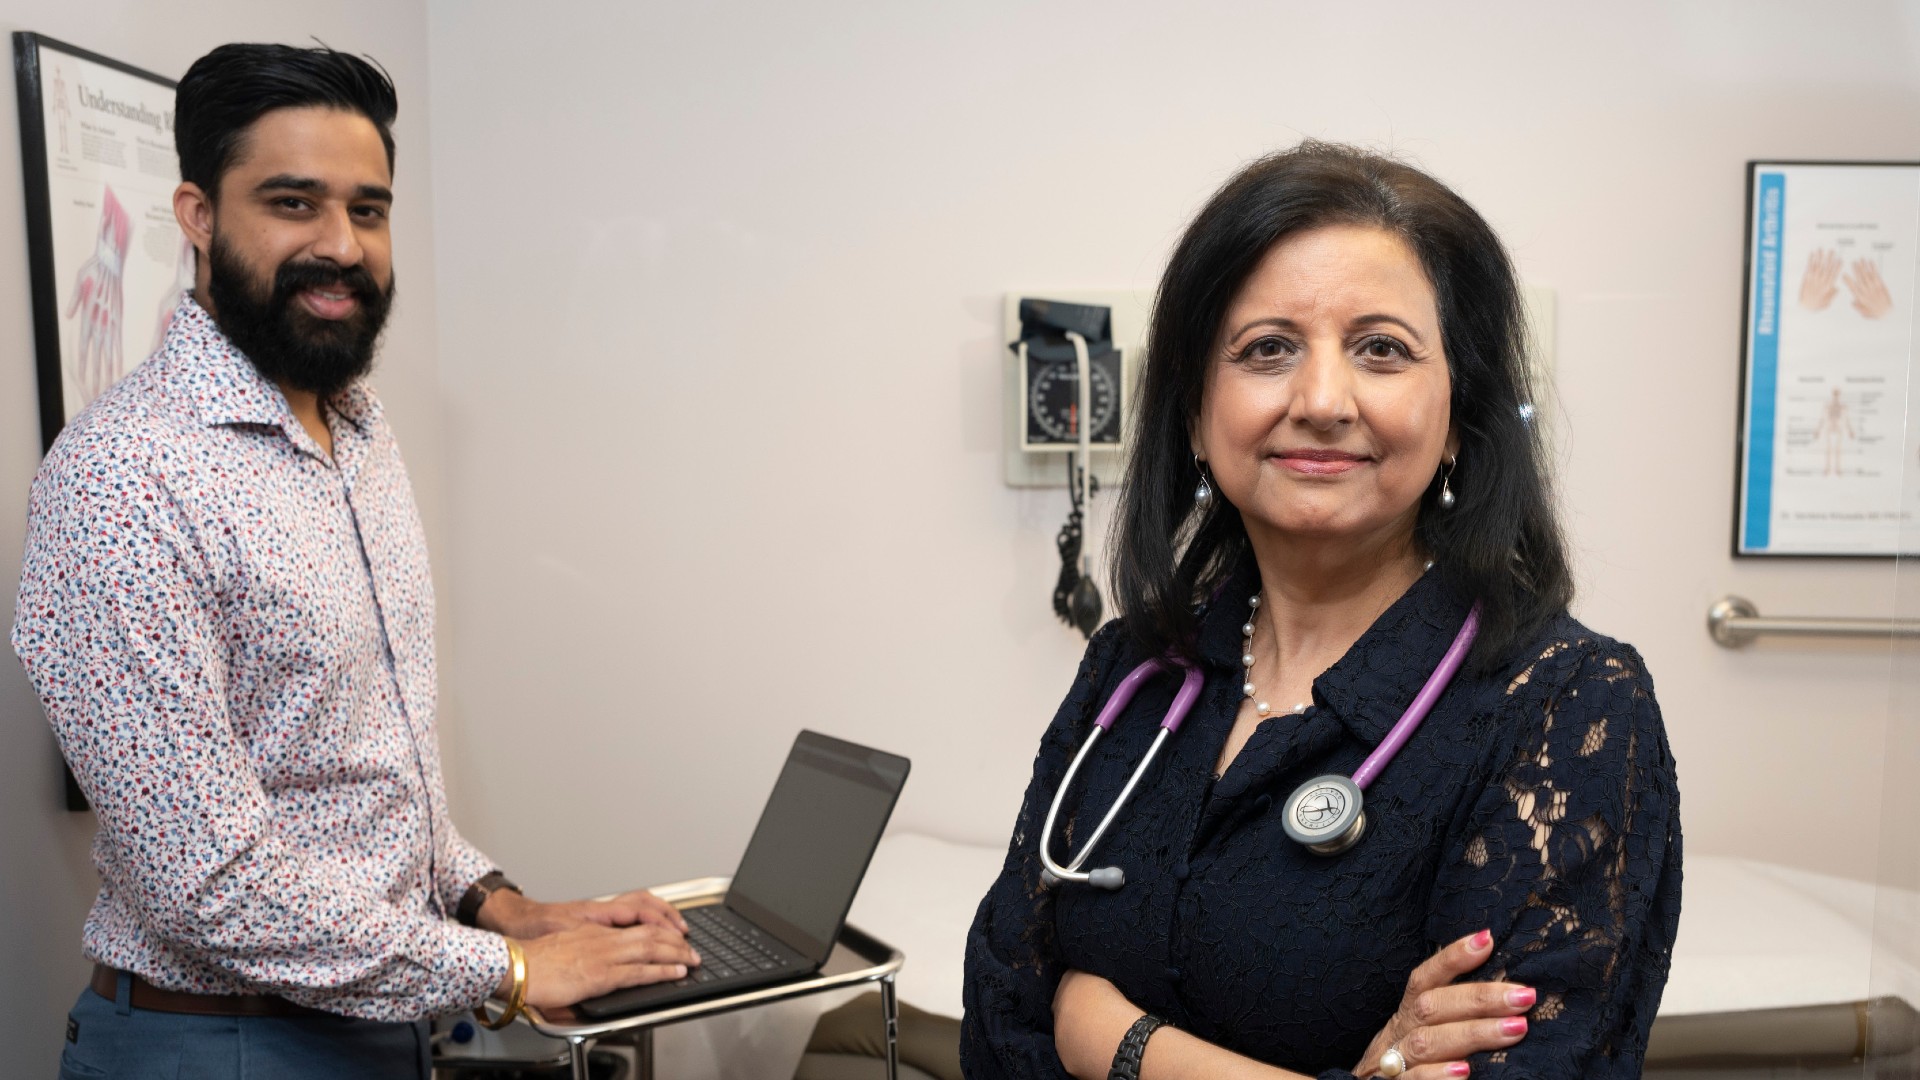 Dr. Vandana Ahluwalia in her office with a medical scribe